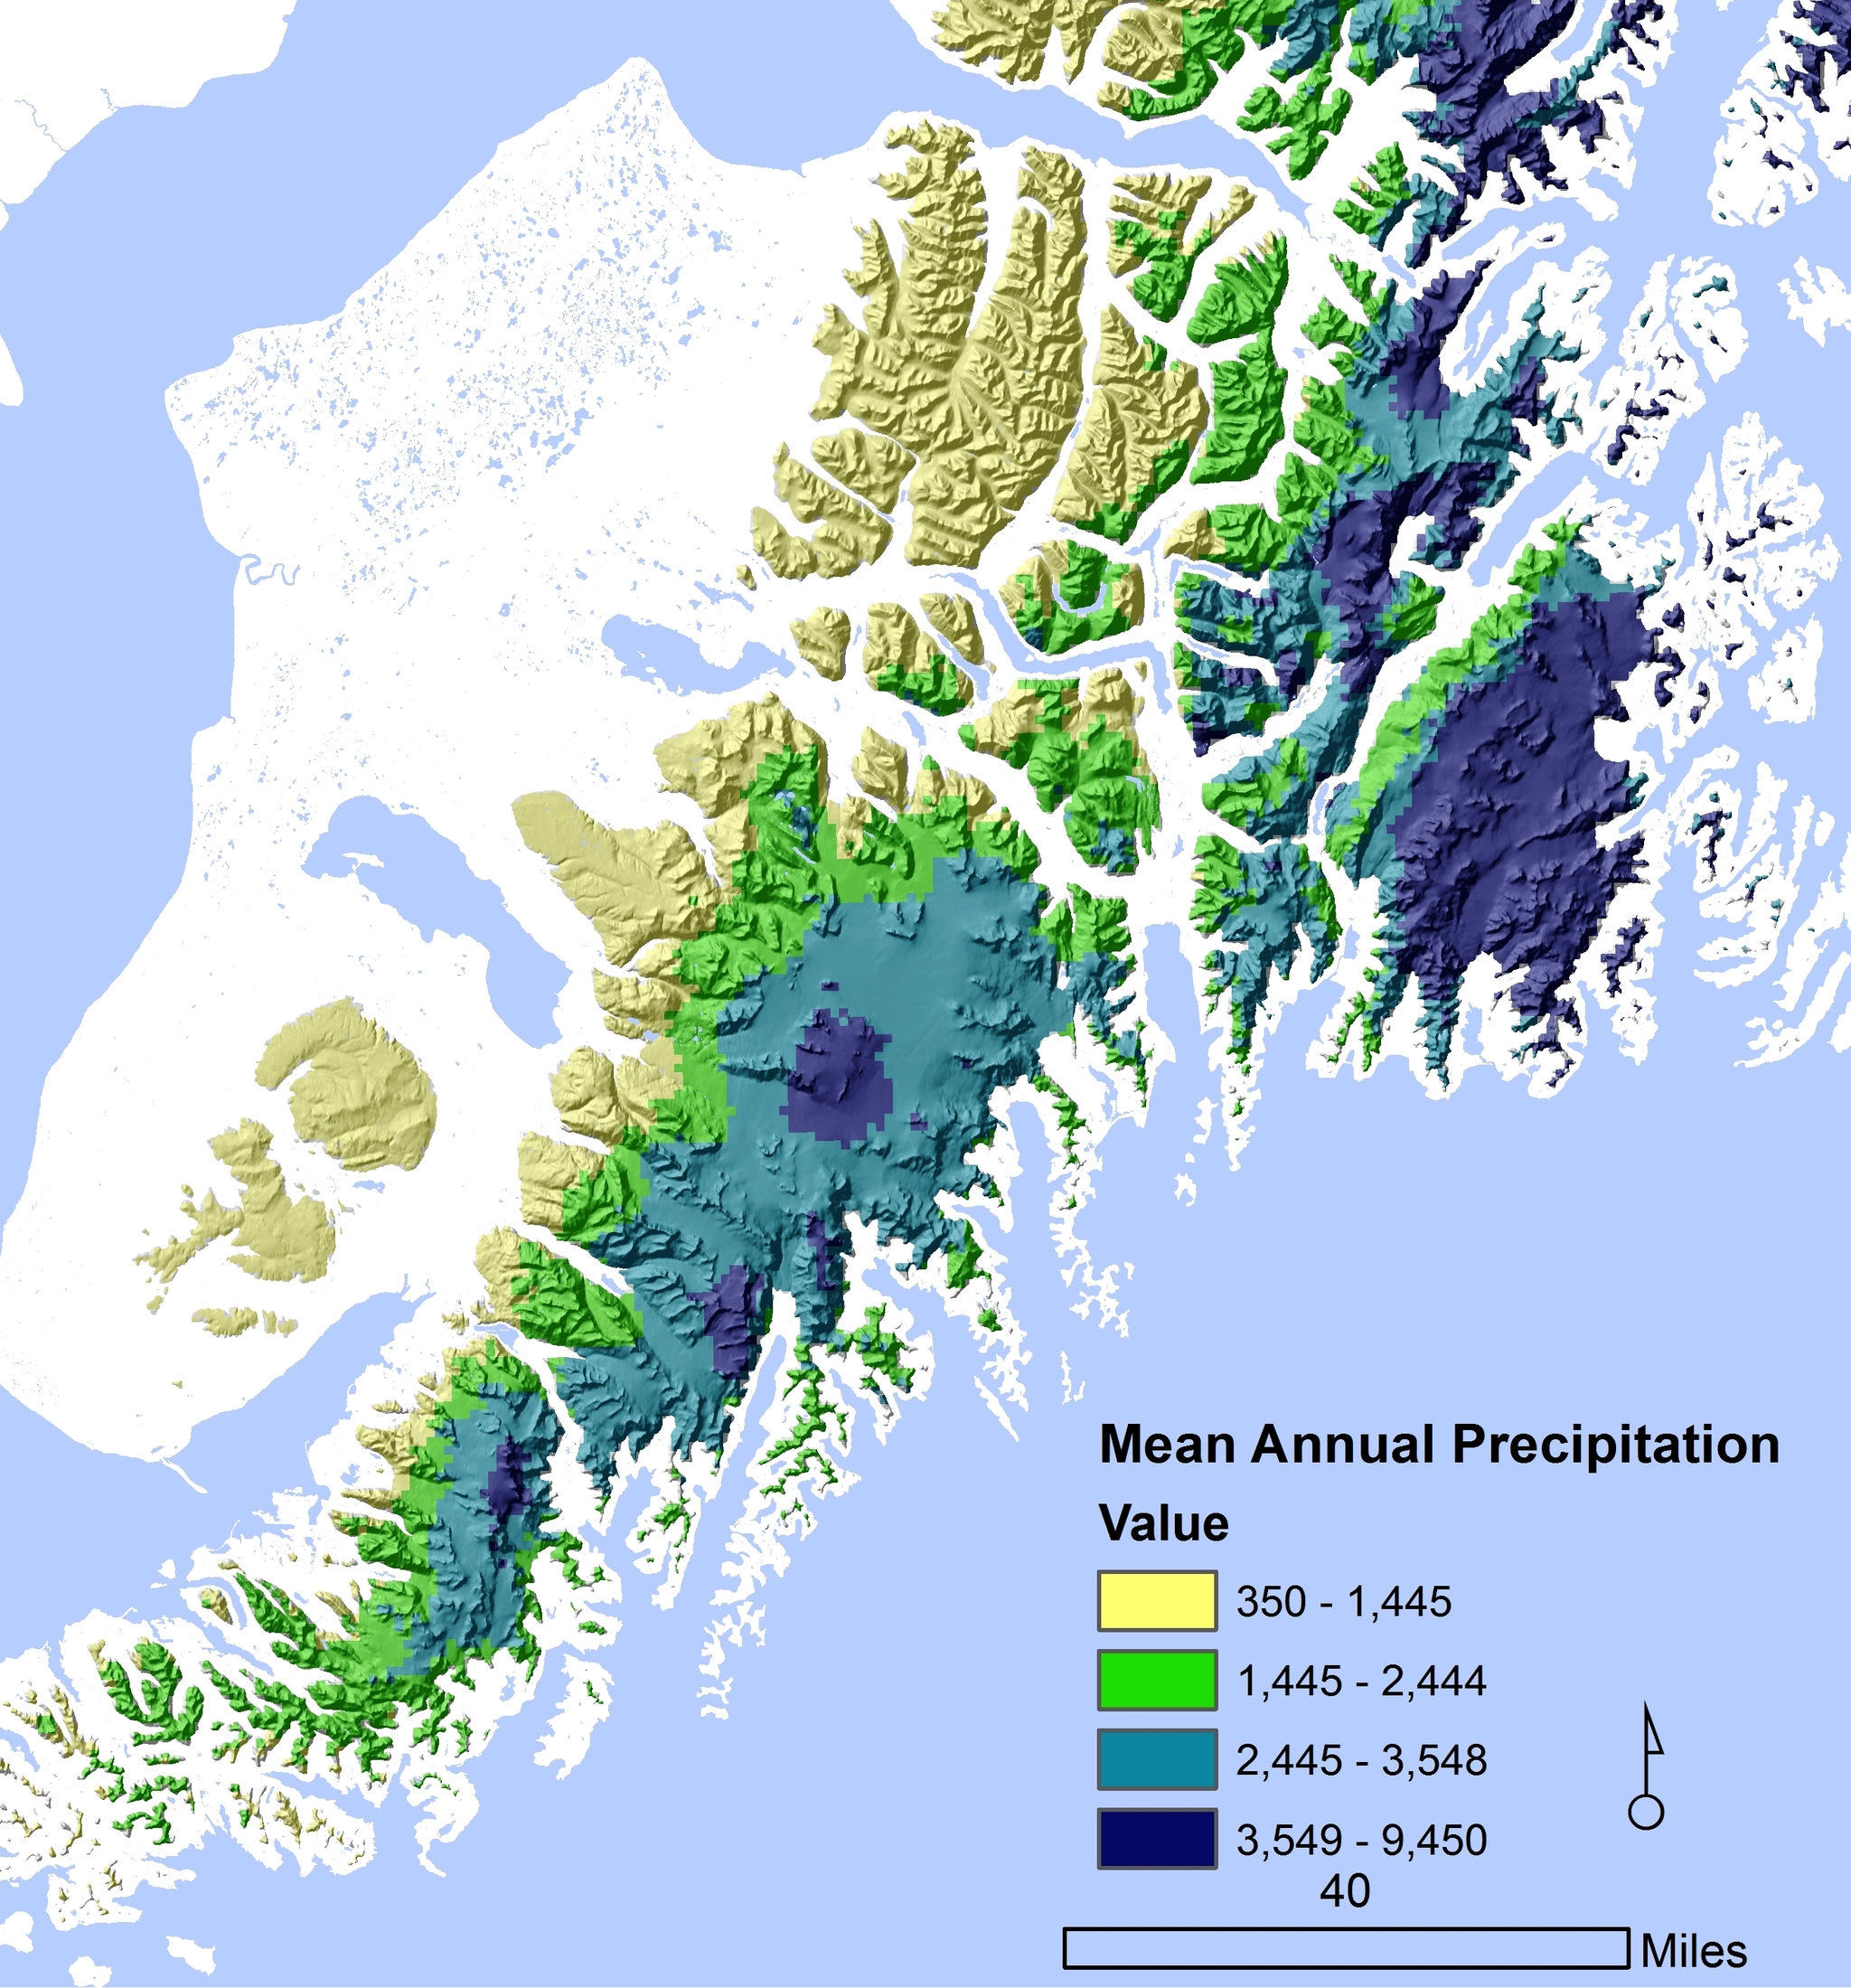 Annual precipitation varies in alpine habitats above 1500 feet on the Kenai Peninsula due to the effects of rain shadows. Precipitation amounts in millimeters and extrapolated from weather stations by AdaptWest (https://adaptwest.databasin.org/).